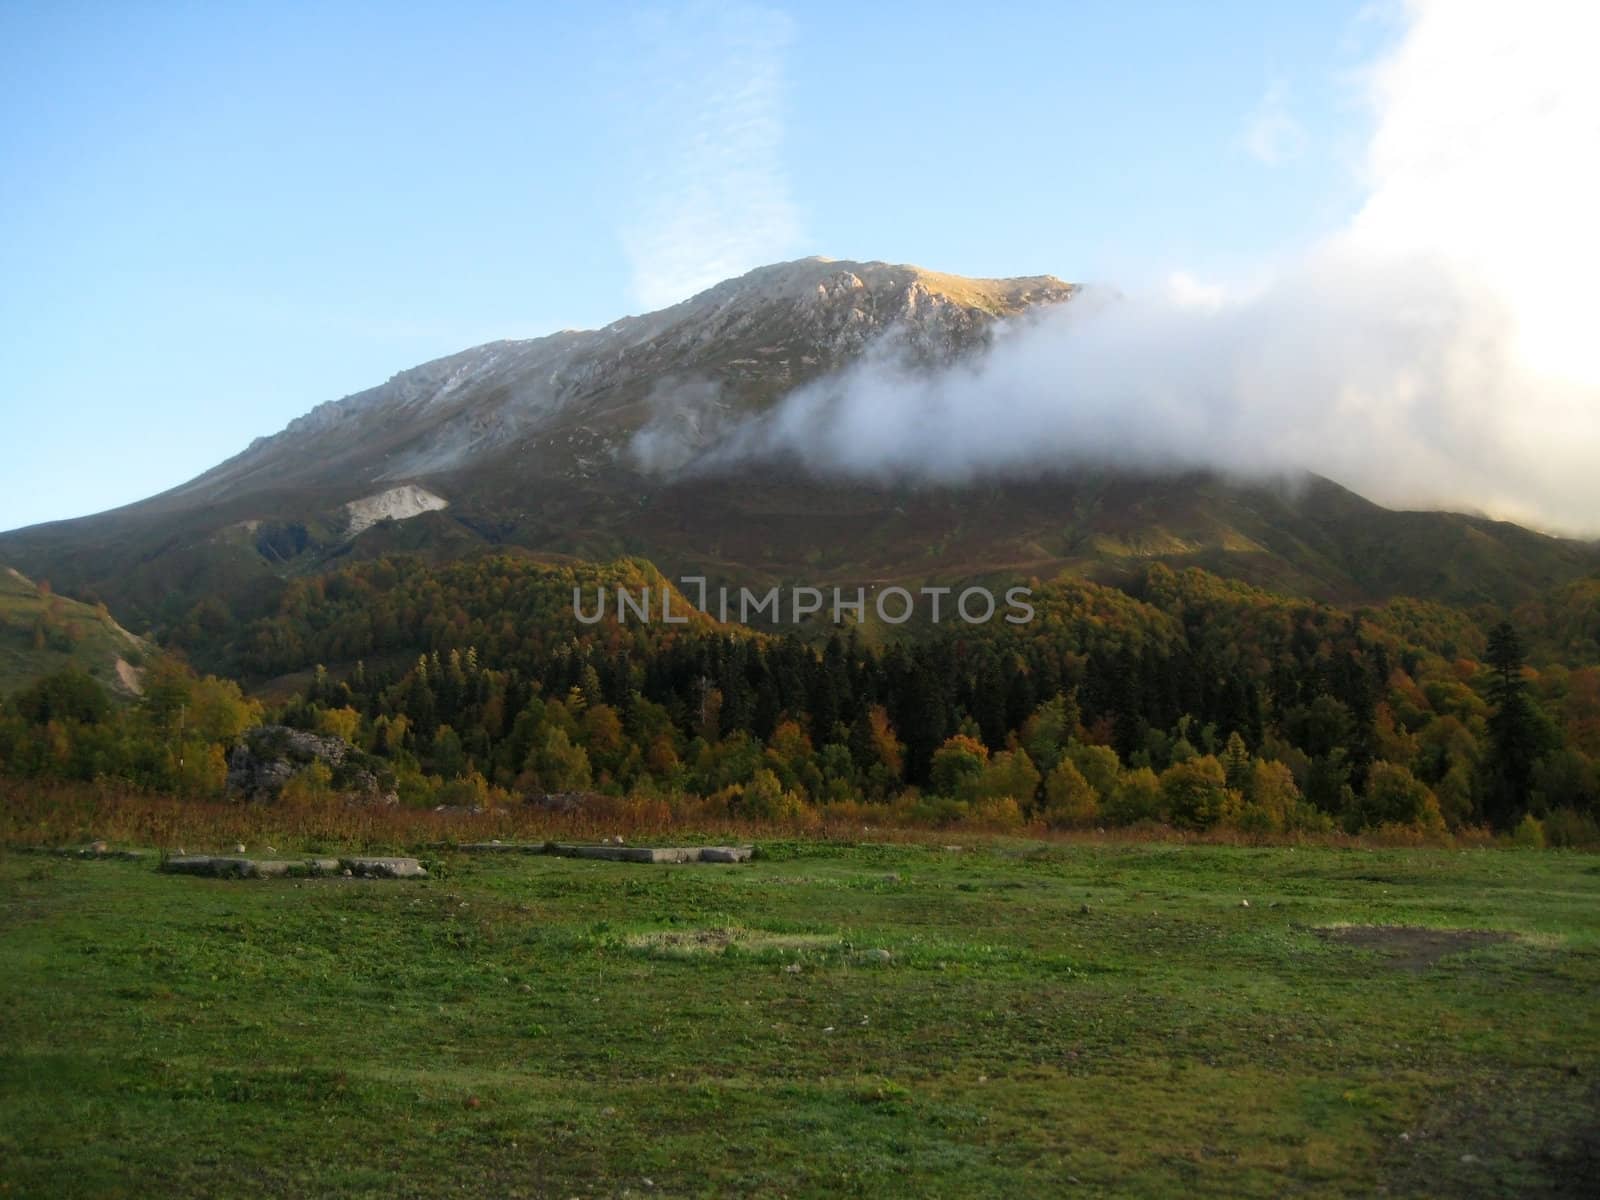 Mountains; caucasus; a relief; a landscape; the nature; a panorama; a hill; a landscape; a ridge; the sky; reserve; a background; a kind; a route; the Alpine meadows; a slope; beauty; a grass; tourism; travel; autumn; flora, clouds, wood, trees